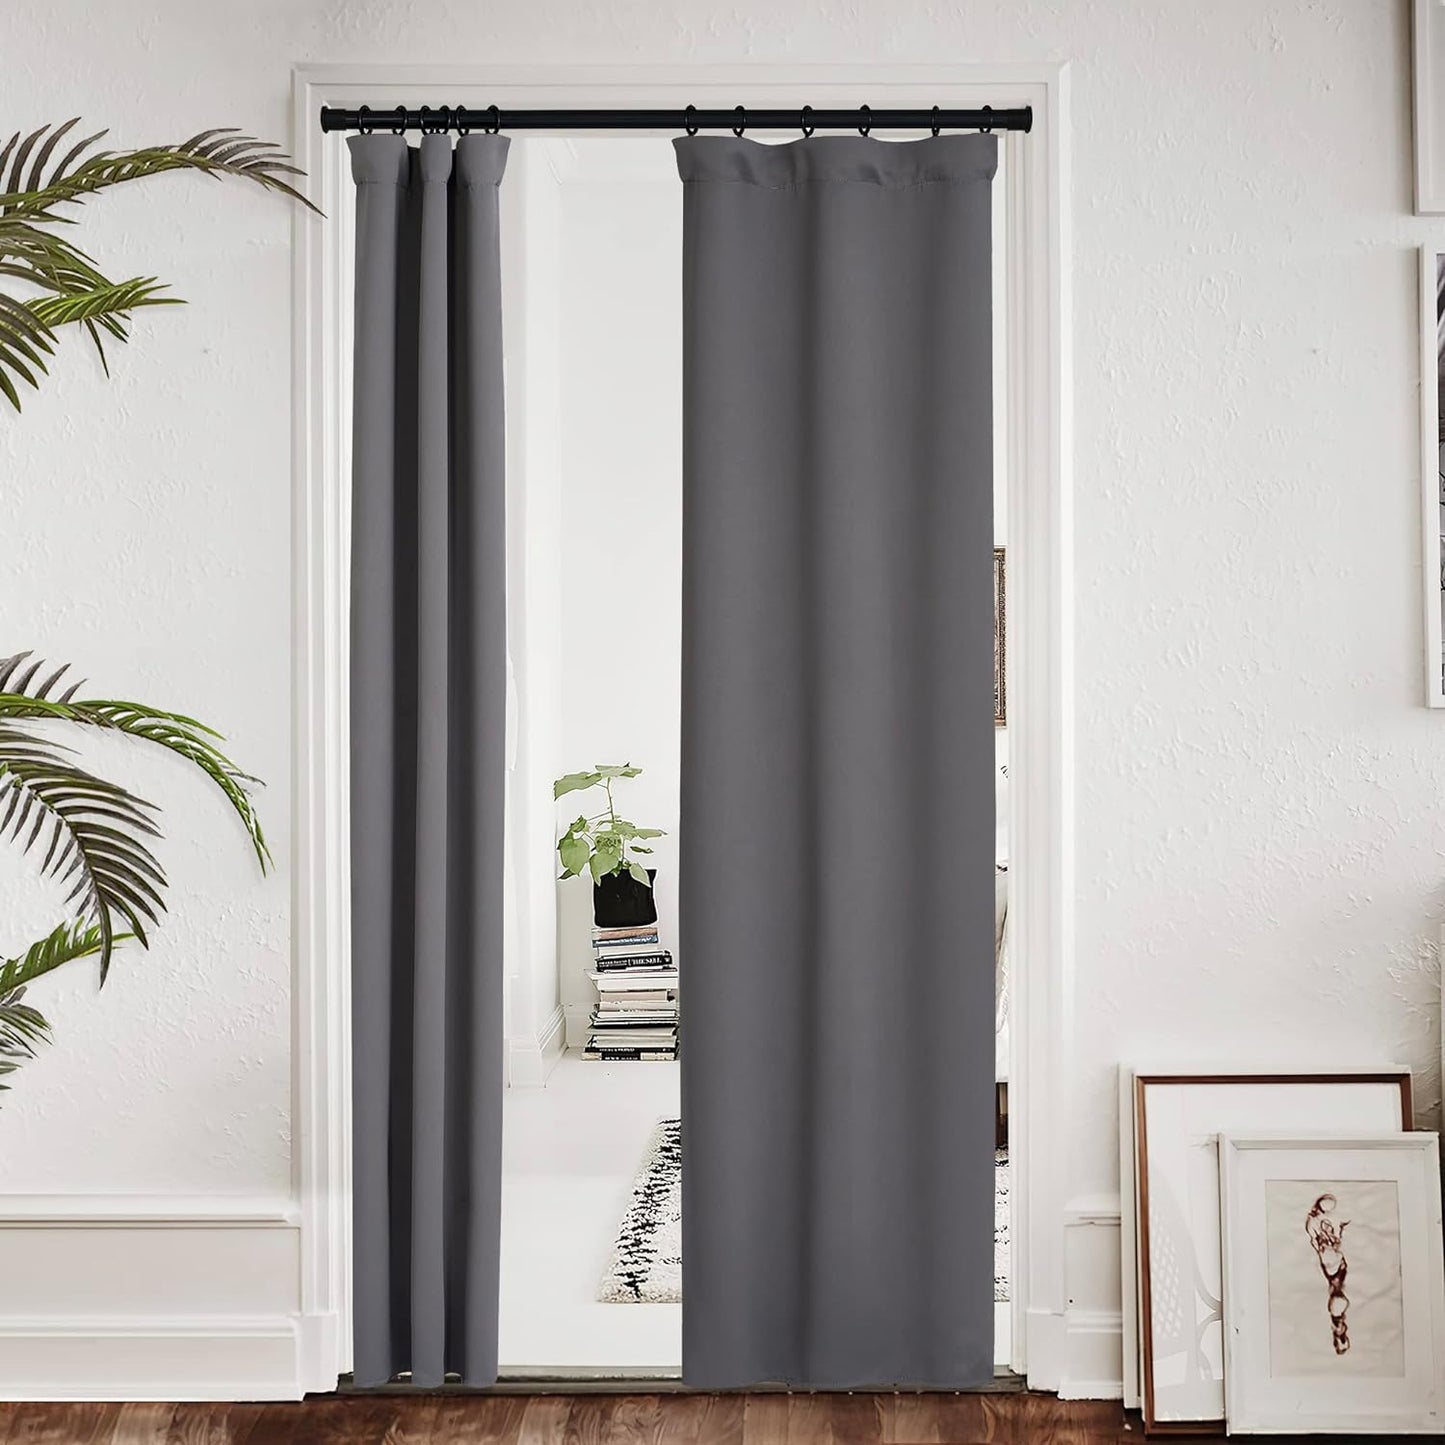 NICETOWN Thermal Insulated Blackout Liner - Blackout Curtain Liner for 63 Inches Drapes, Light Blocking Curtain Liners, Block Out Curtain Liners, Hooks Included, 2 Panels, 45W by 58L Inches  NICETOWN Grey 2 X W27" X L80" 